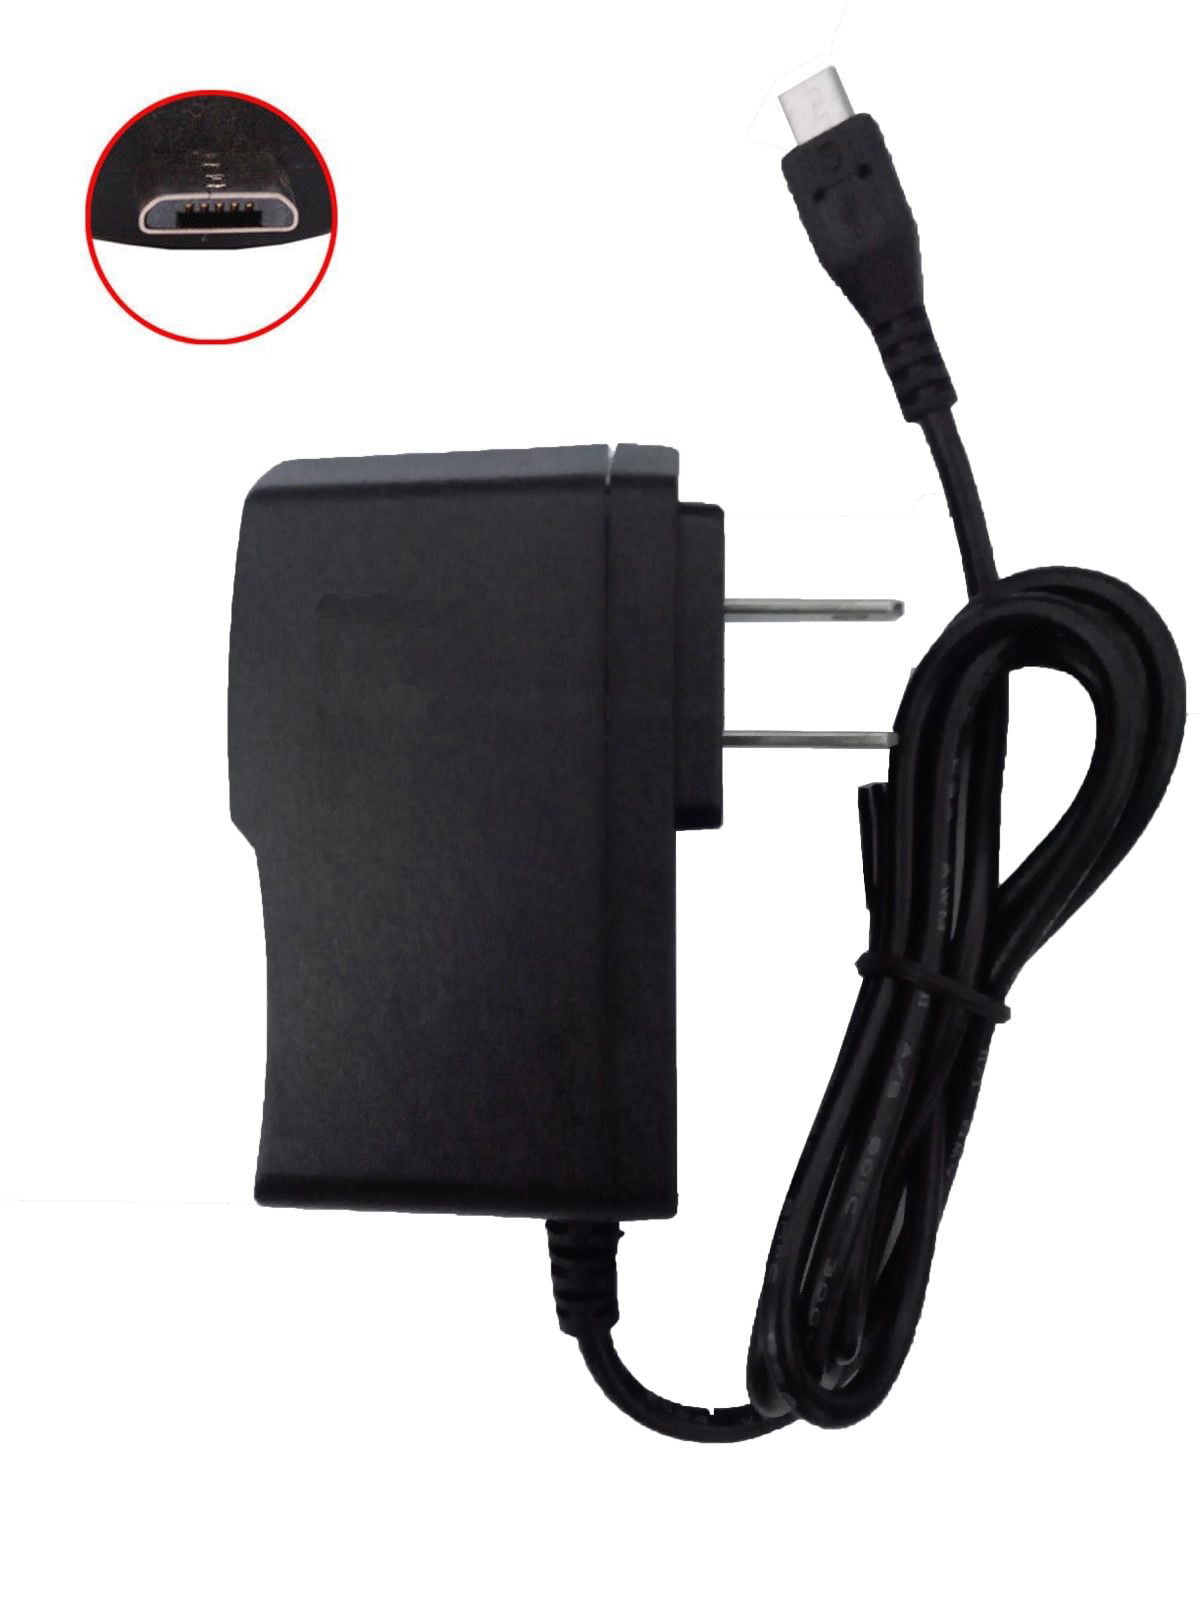 USB Charging Charger Port Dock for Samsung Galaxy Tab 4 7.0 7.0" Tablet 